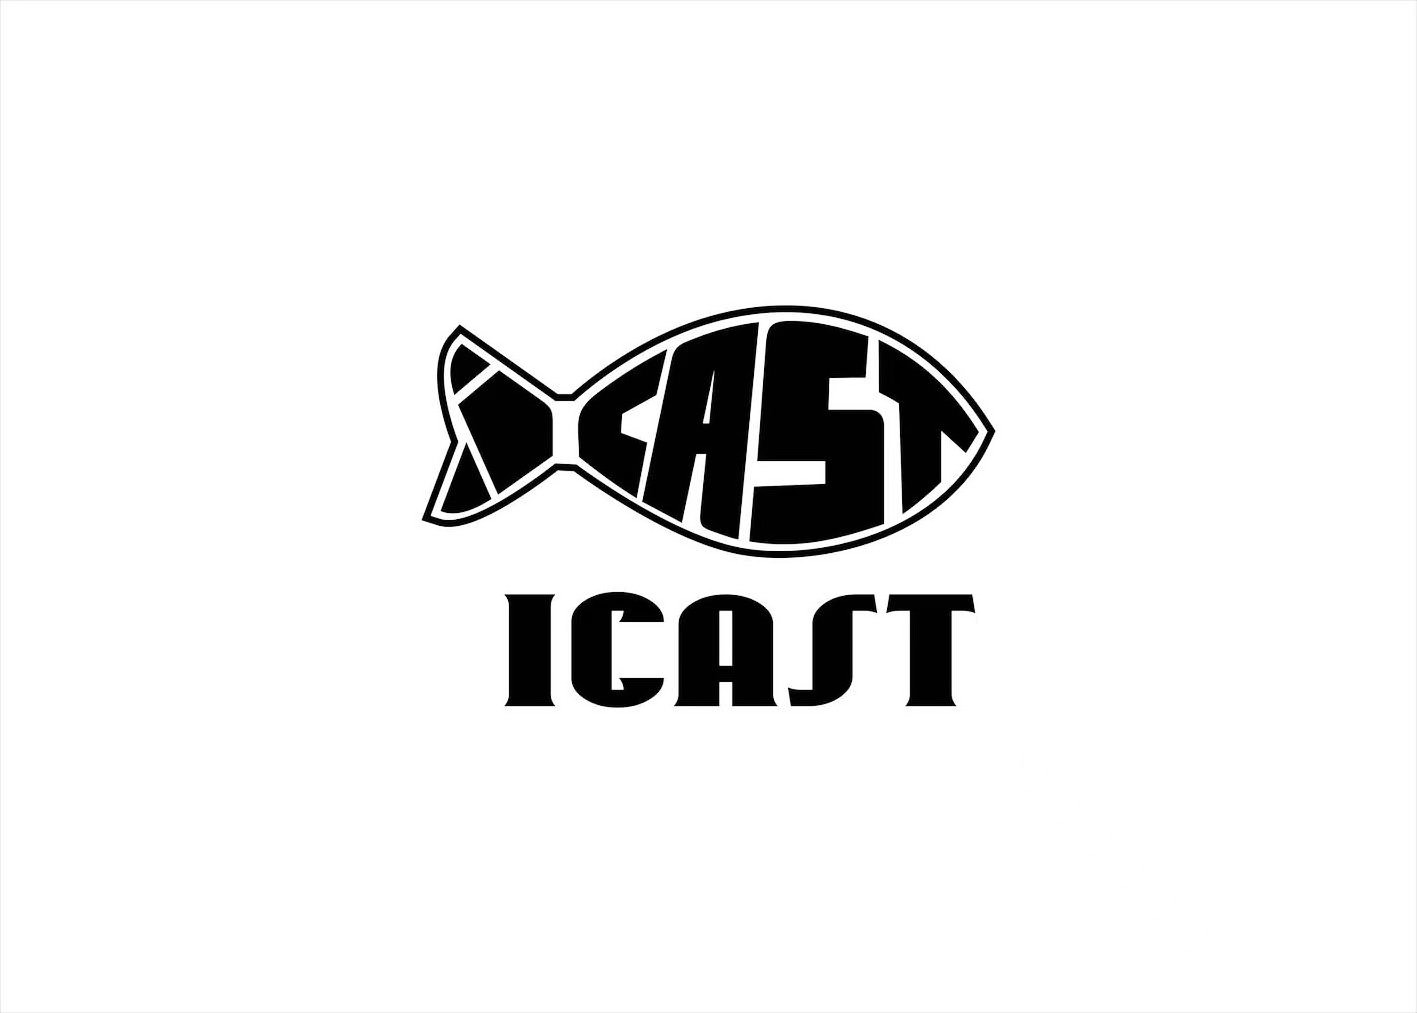 ICAST